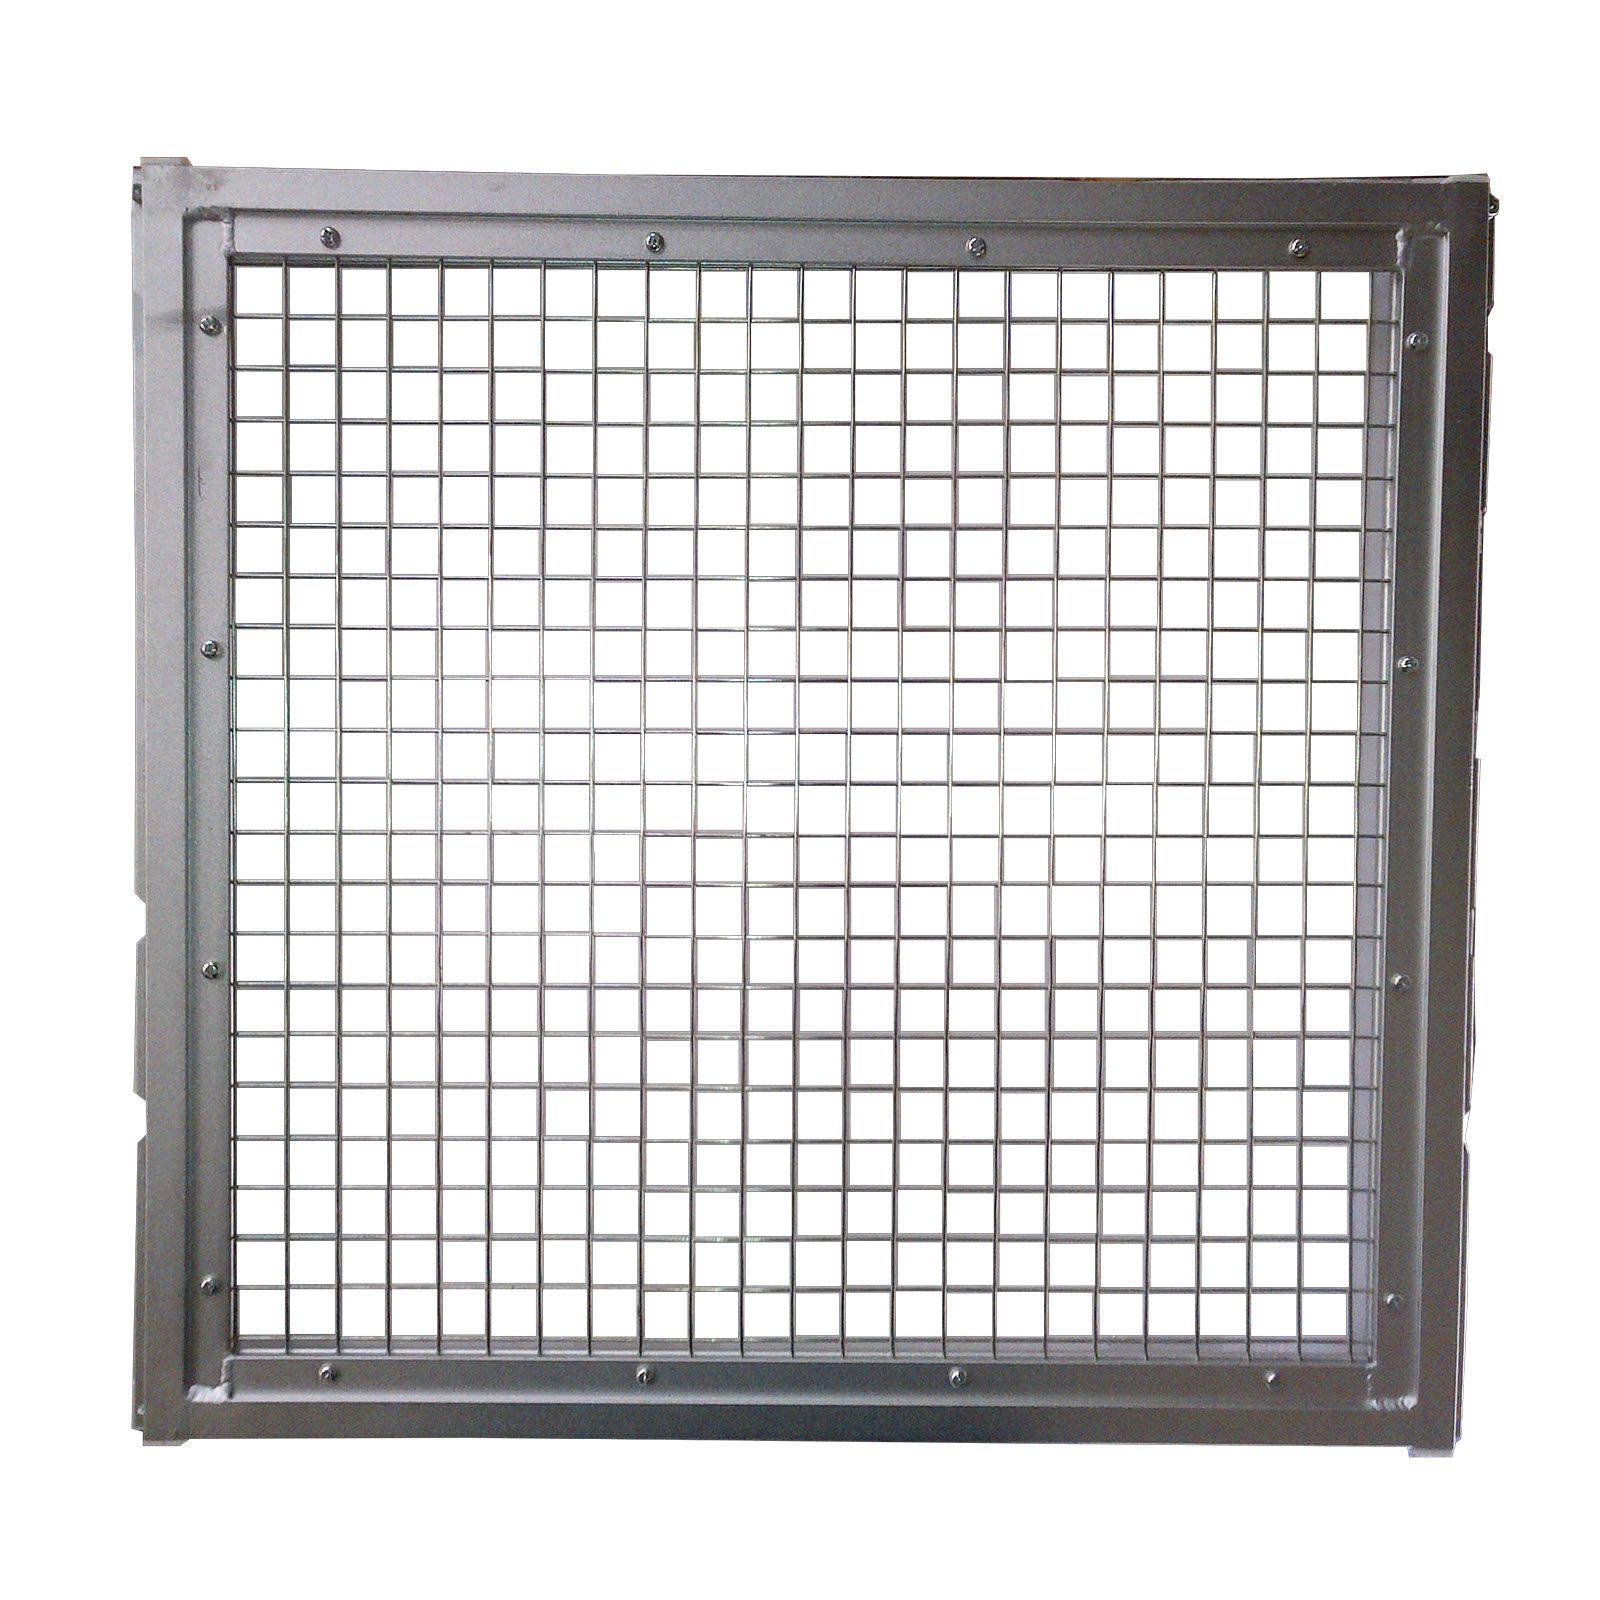 PROTECTION NET 100T product photo